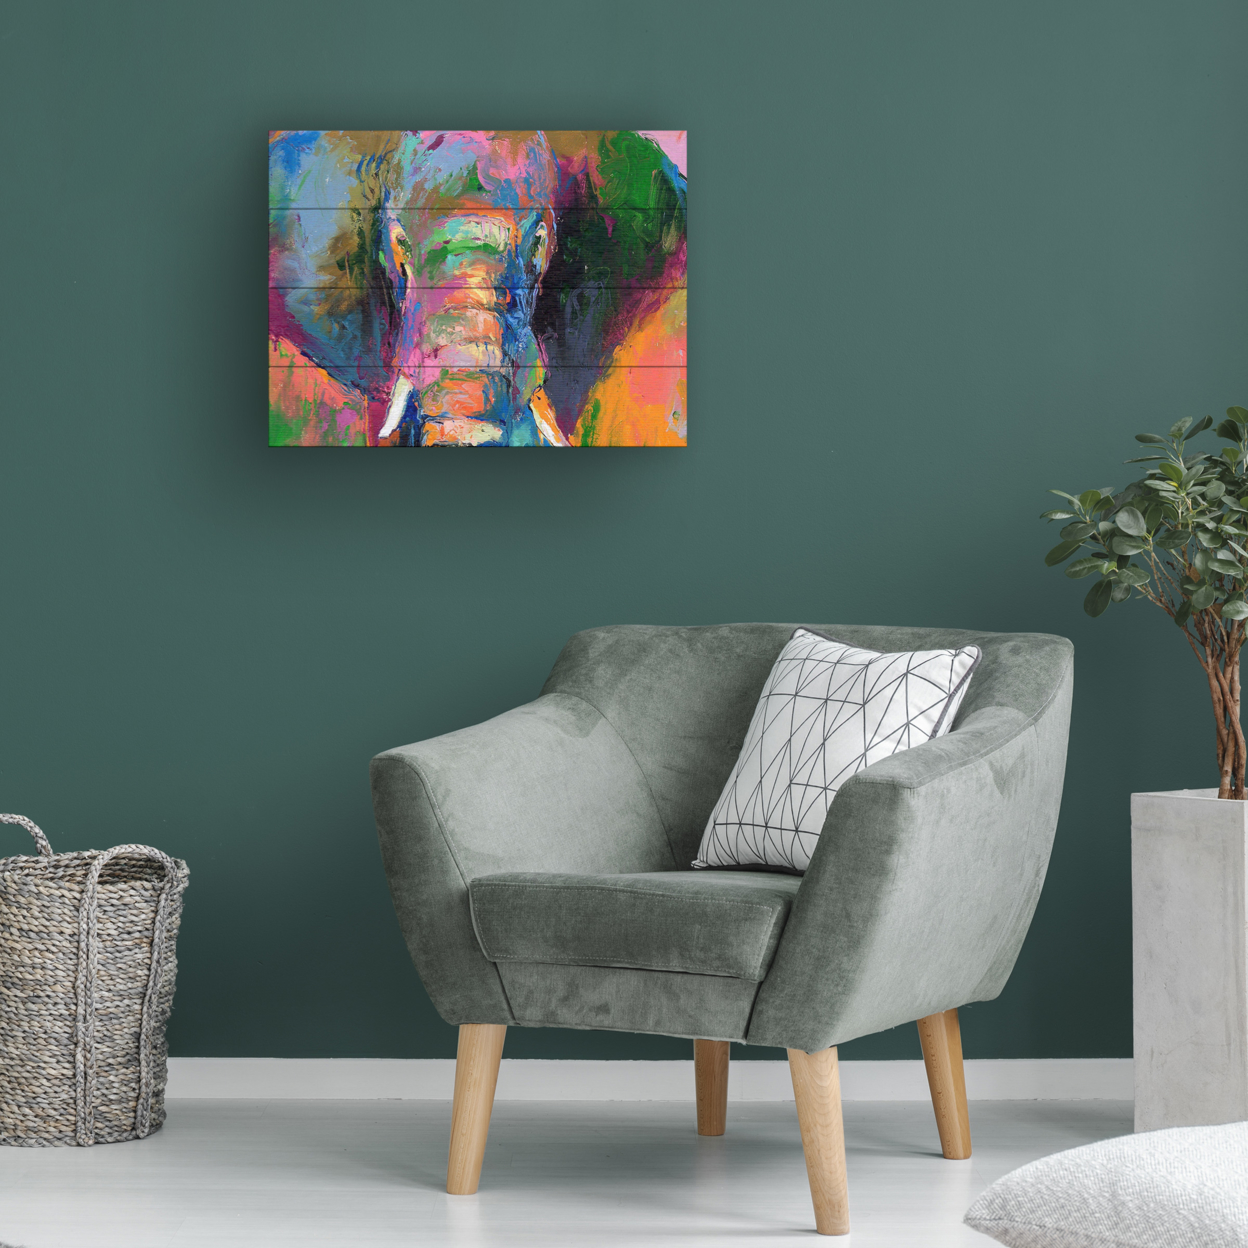 Wall Art 12 X 16 Inches Titled Elephant 2 Ready To Hang Printed On Wooden Planks